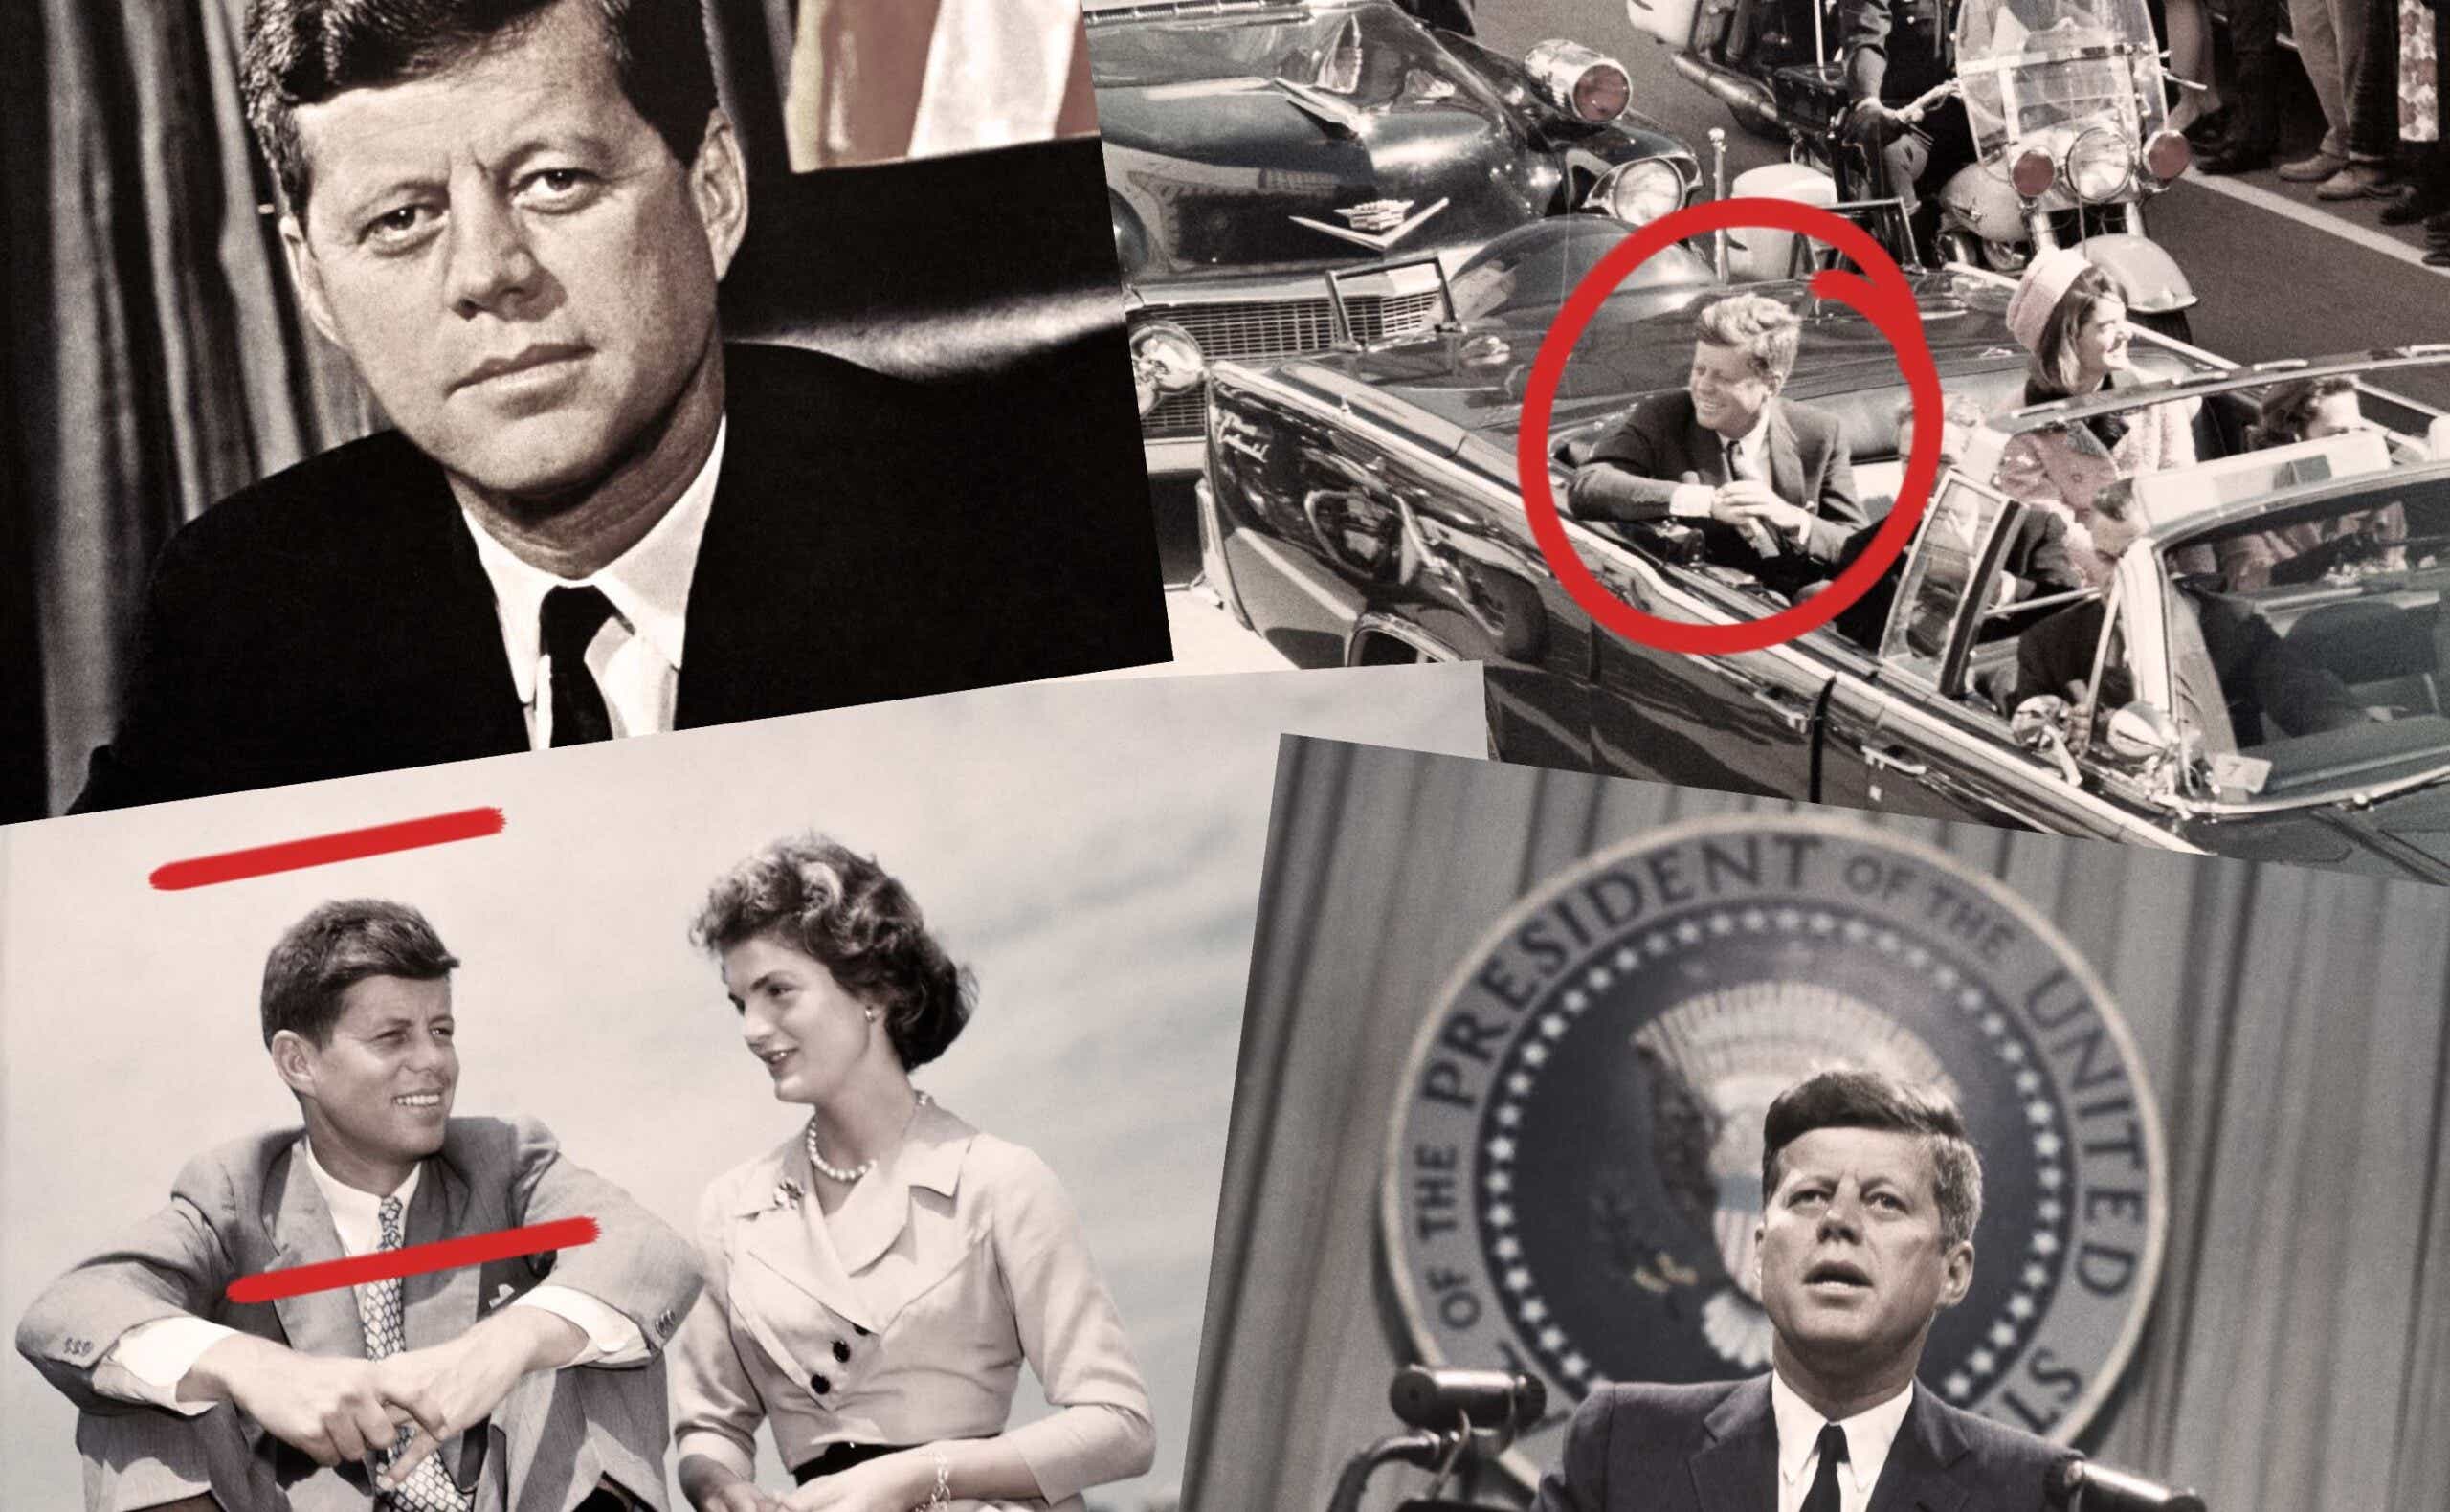 A montage of photos of JFK and his wife Jacqueline, with pen marks annotating them